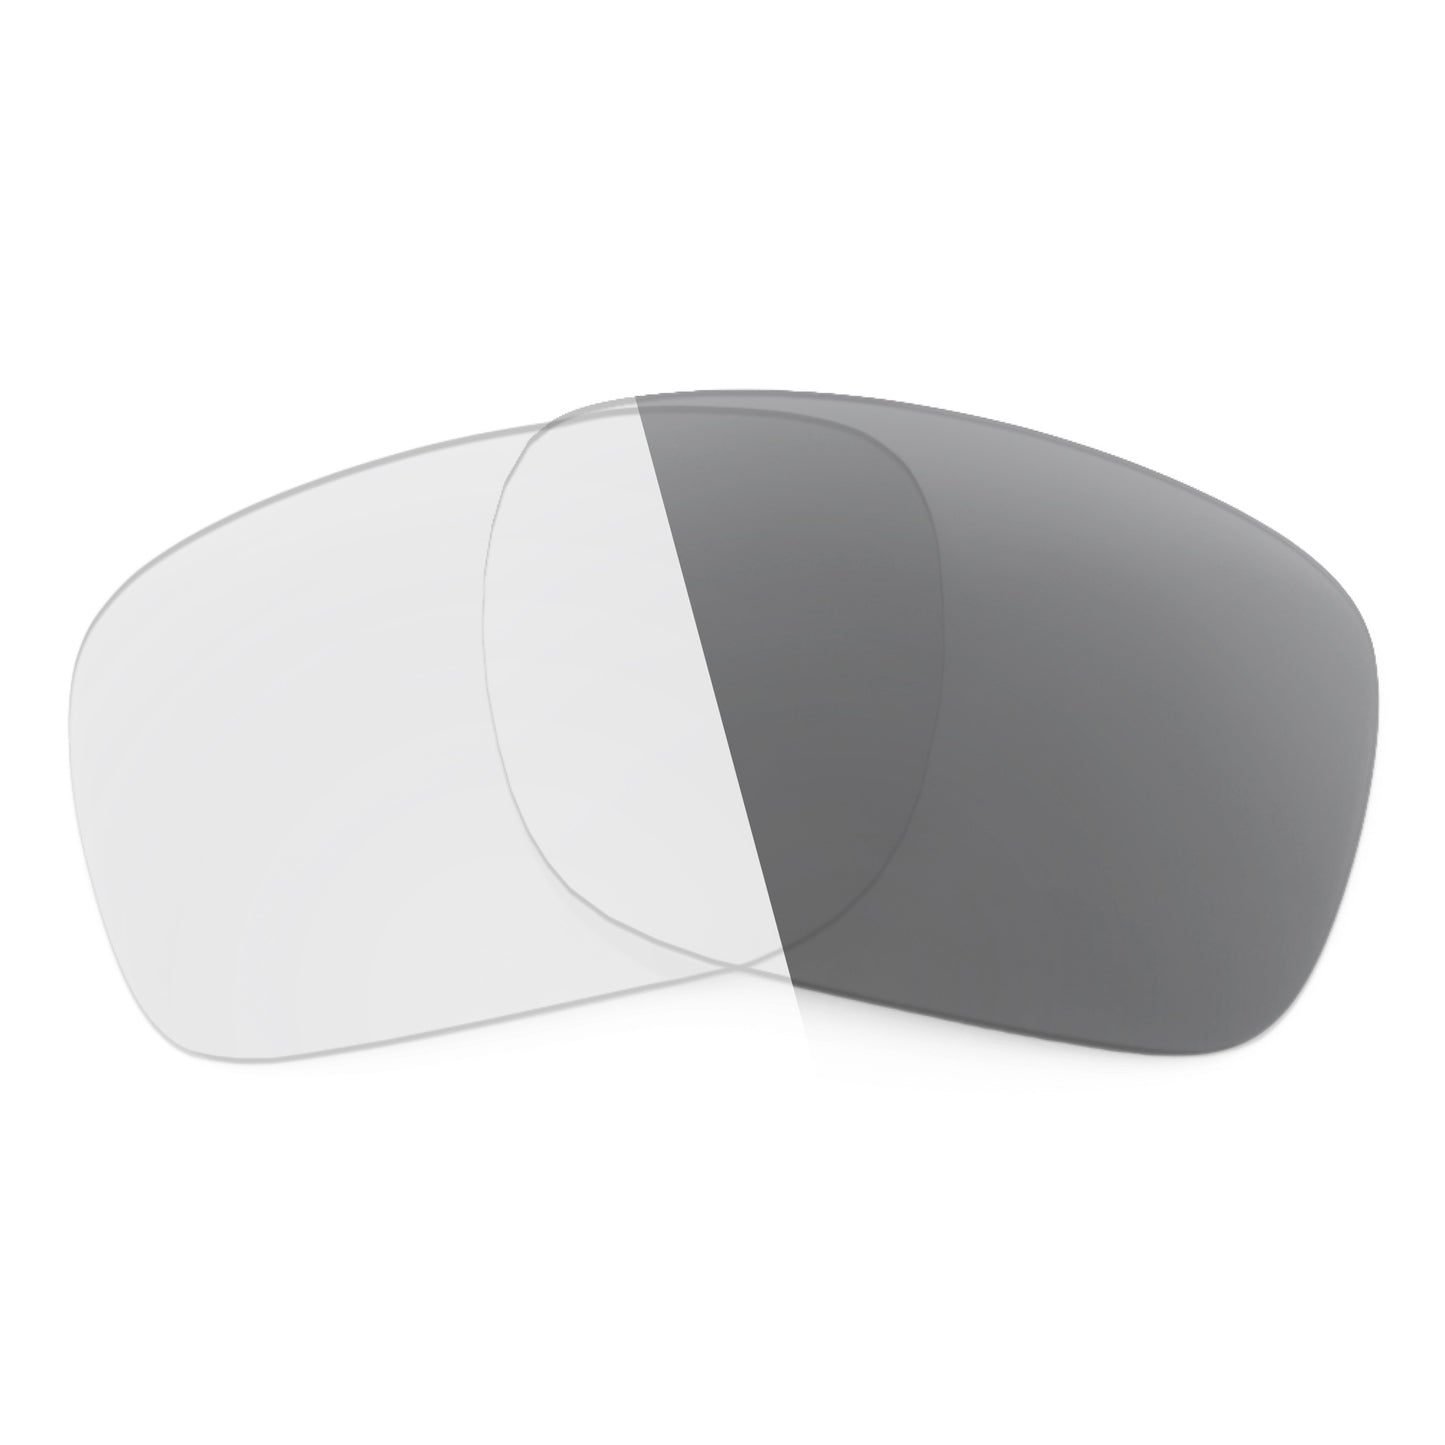 Revant replacement lenses for Ray-Ban RB3476 60mm Non-Polarized Adapt Gray Photochromic